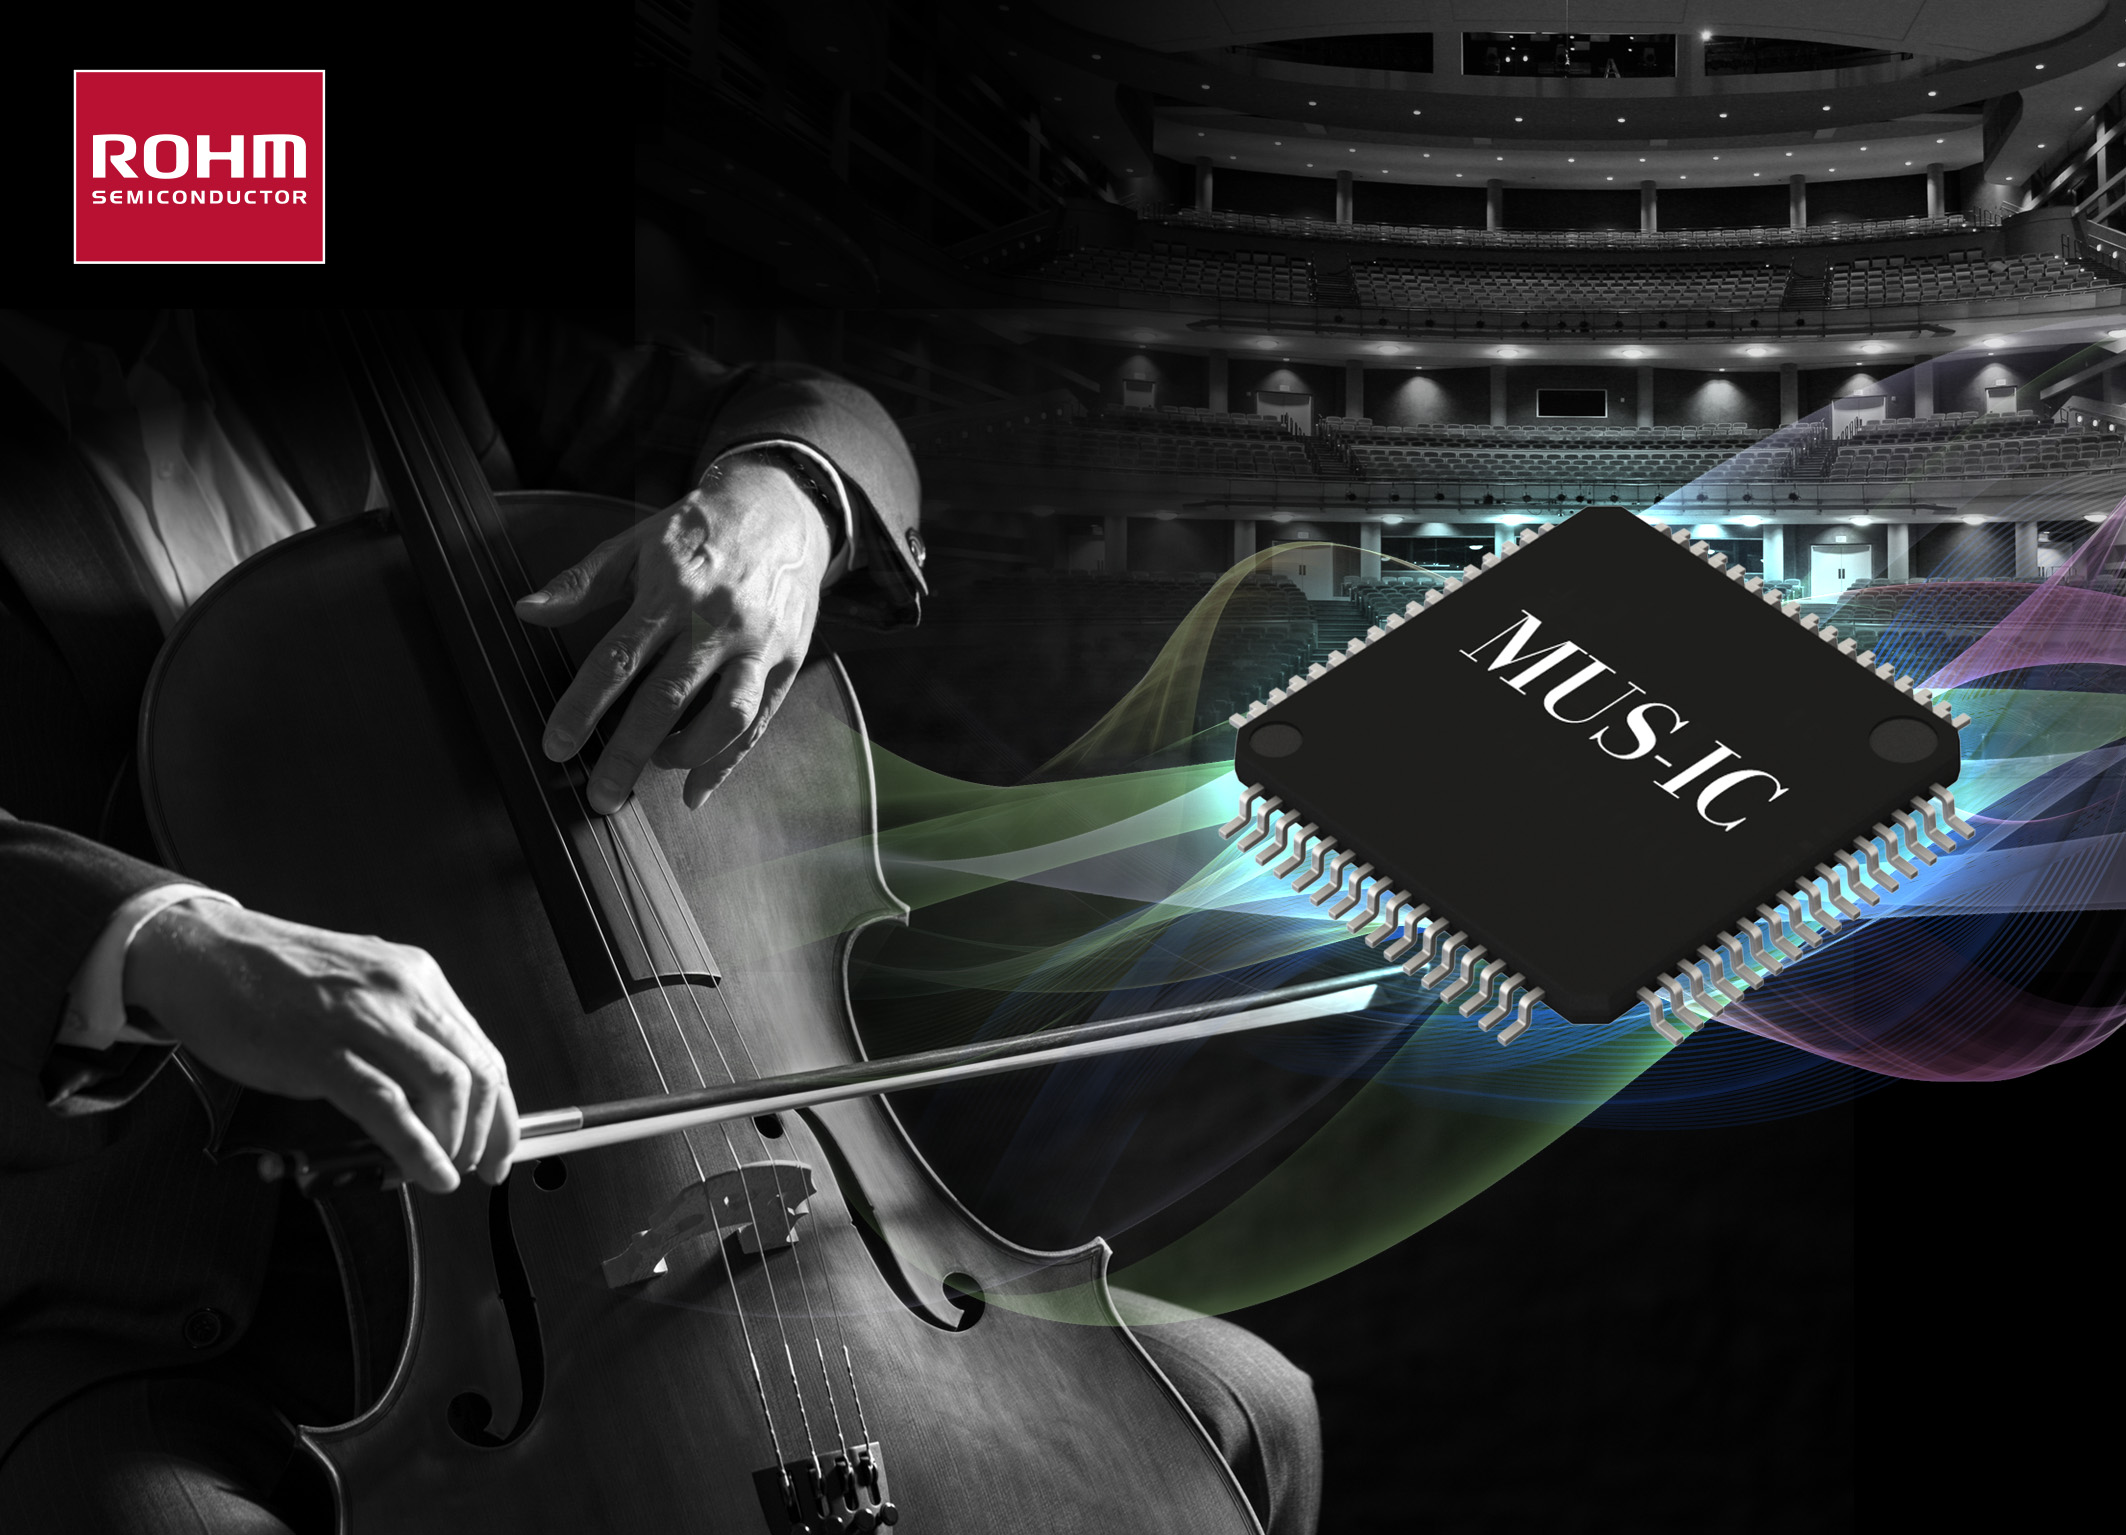 ROHM's MUS-IC™ Series DAC chip enables expressive playback of classical music